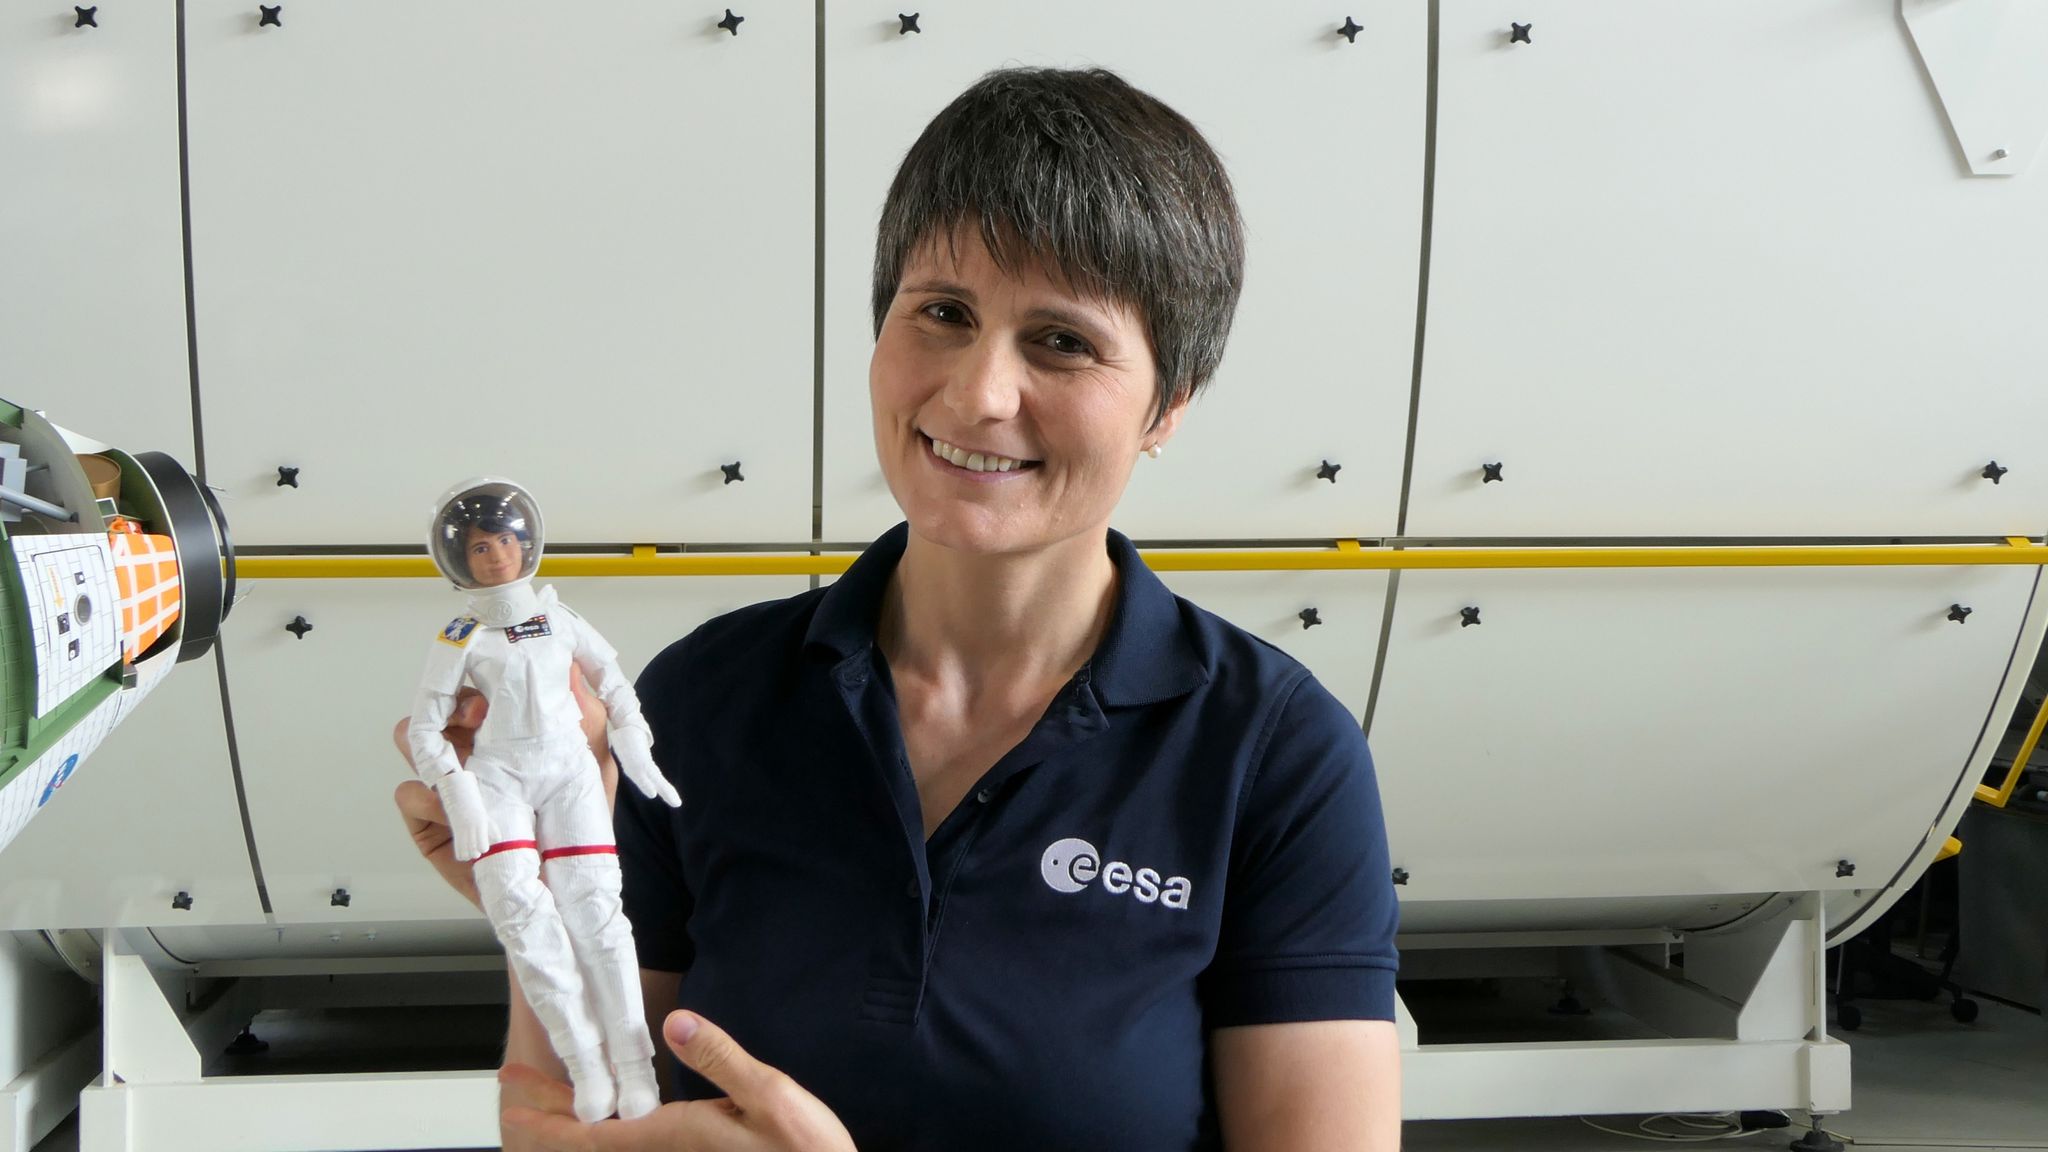 Barbie sent a doll on a zero-gravity flight to inspire young girls to work in space and STEM